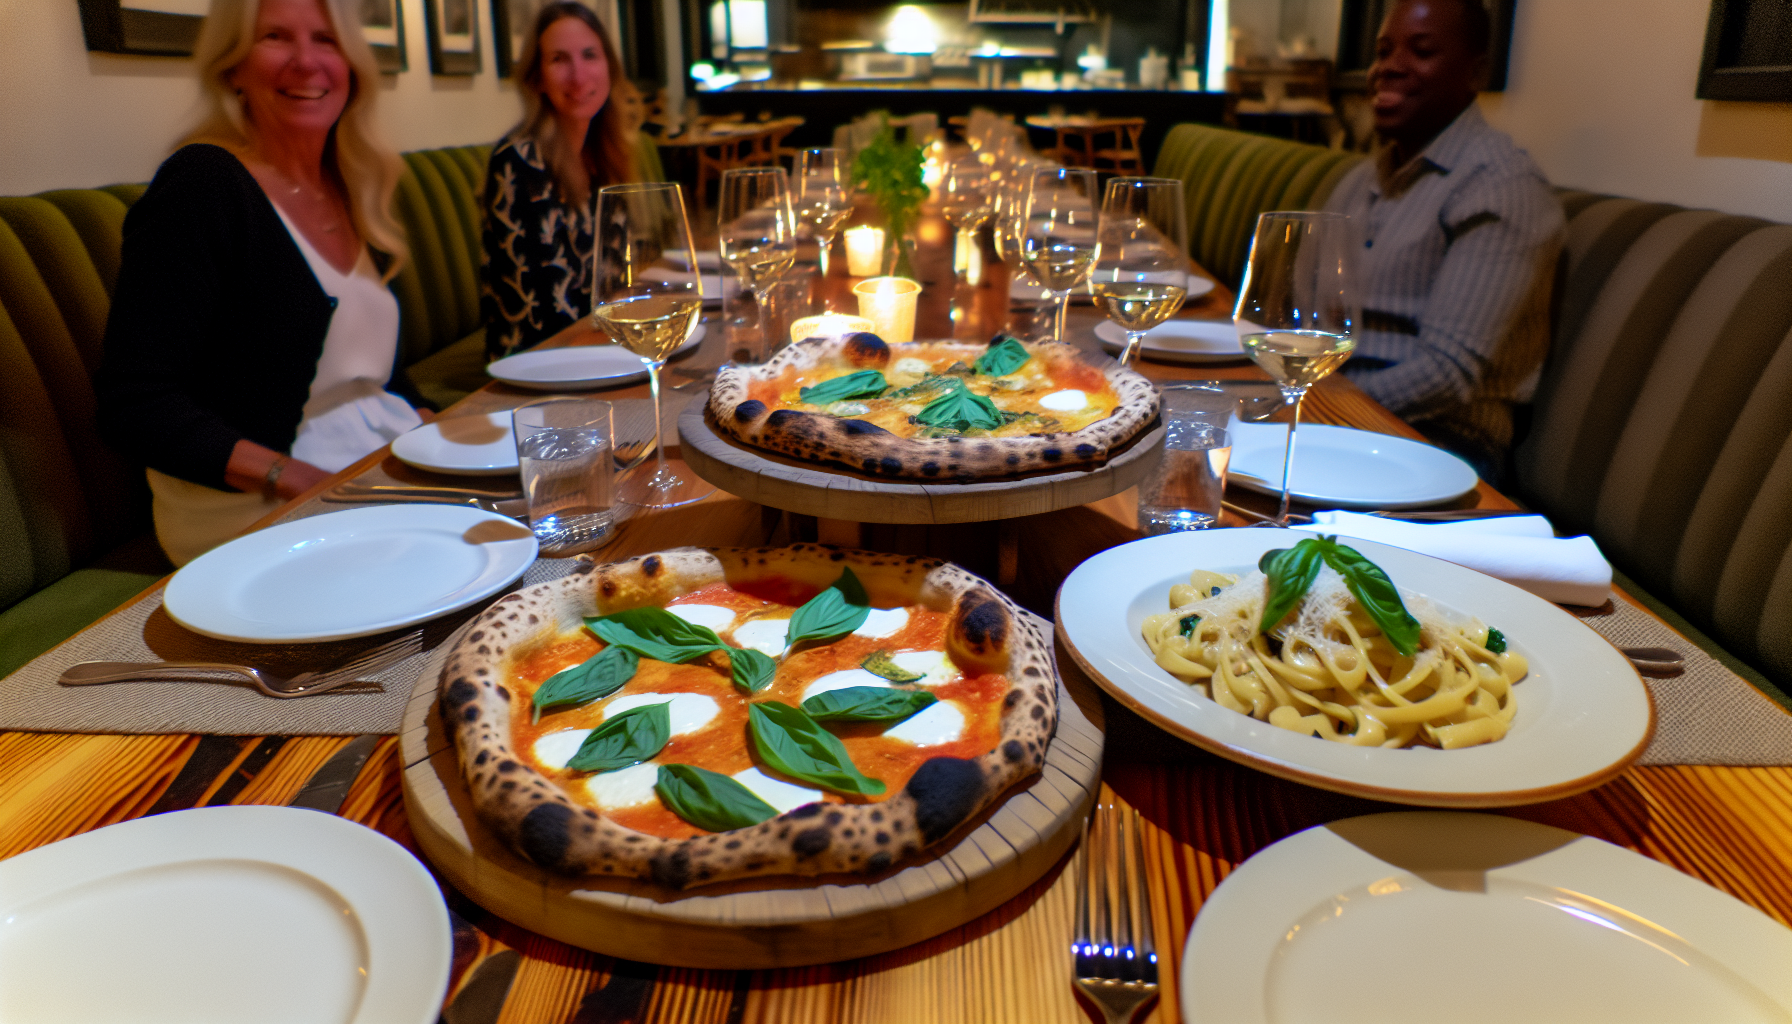 Mouthwatering artisanal pizzas and pasta at Acquolina Weston